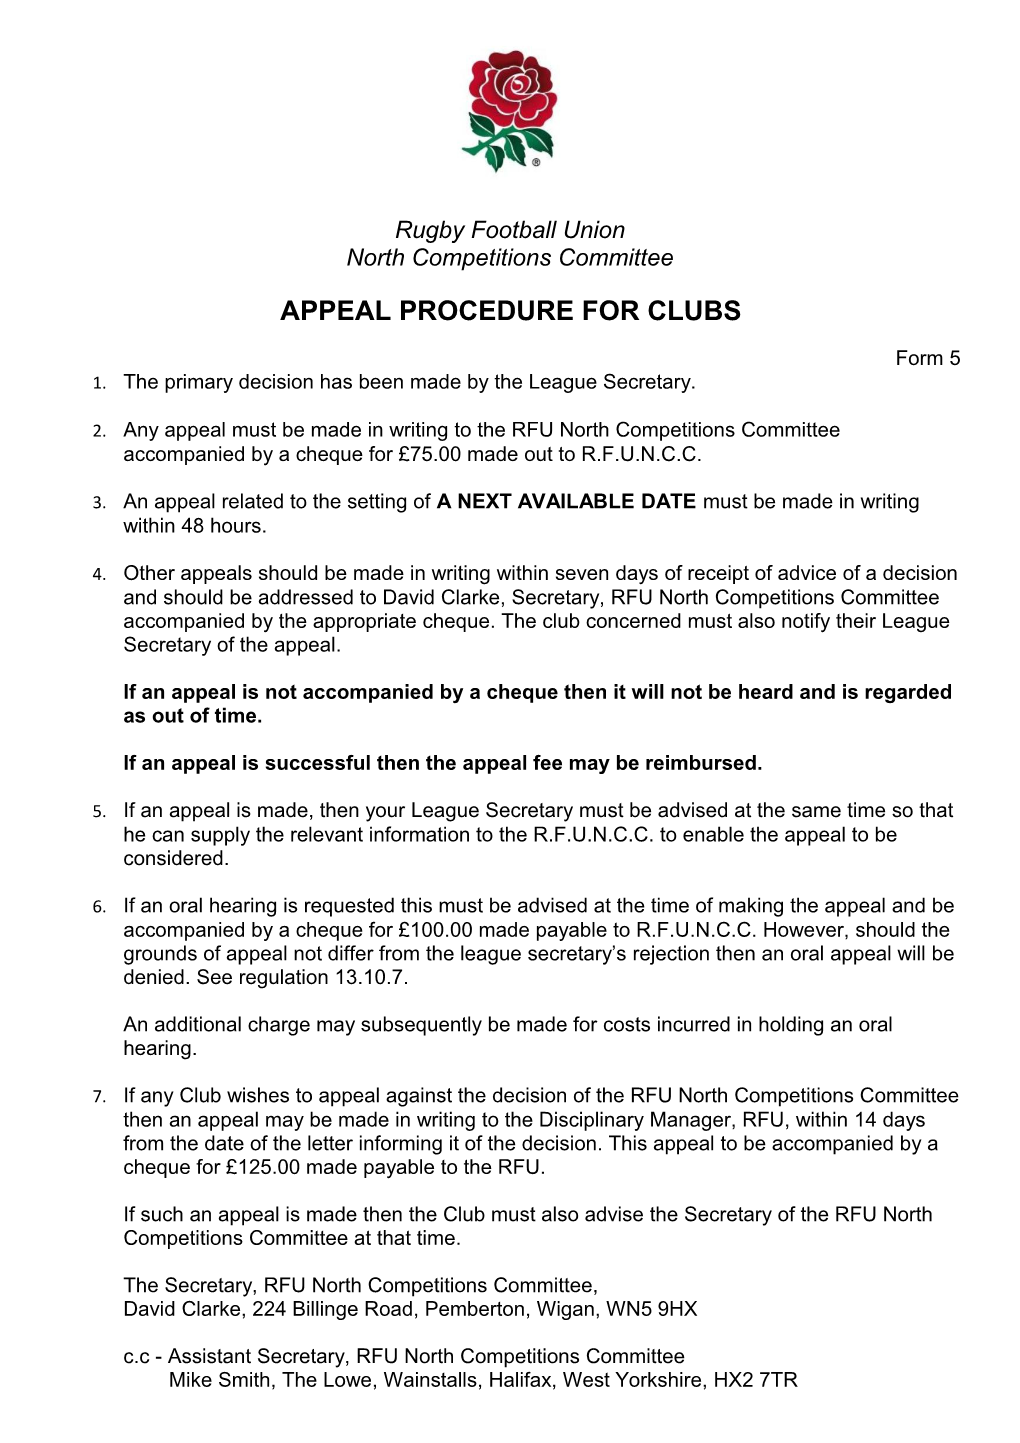 Appeal Procedure for Clubs